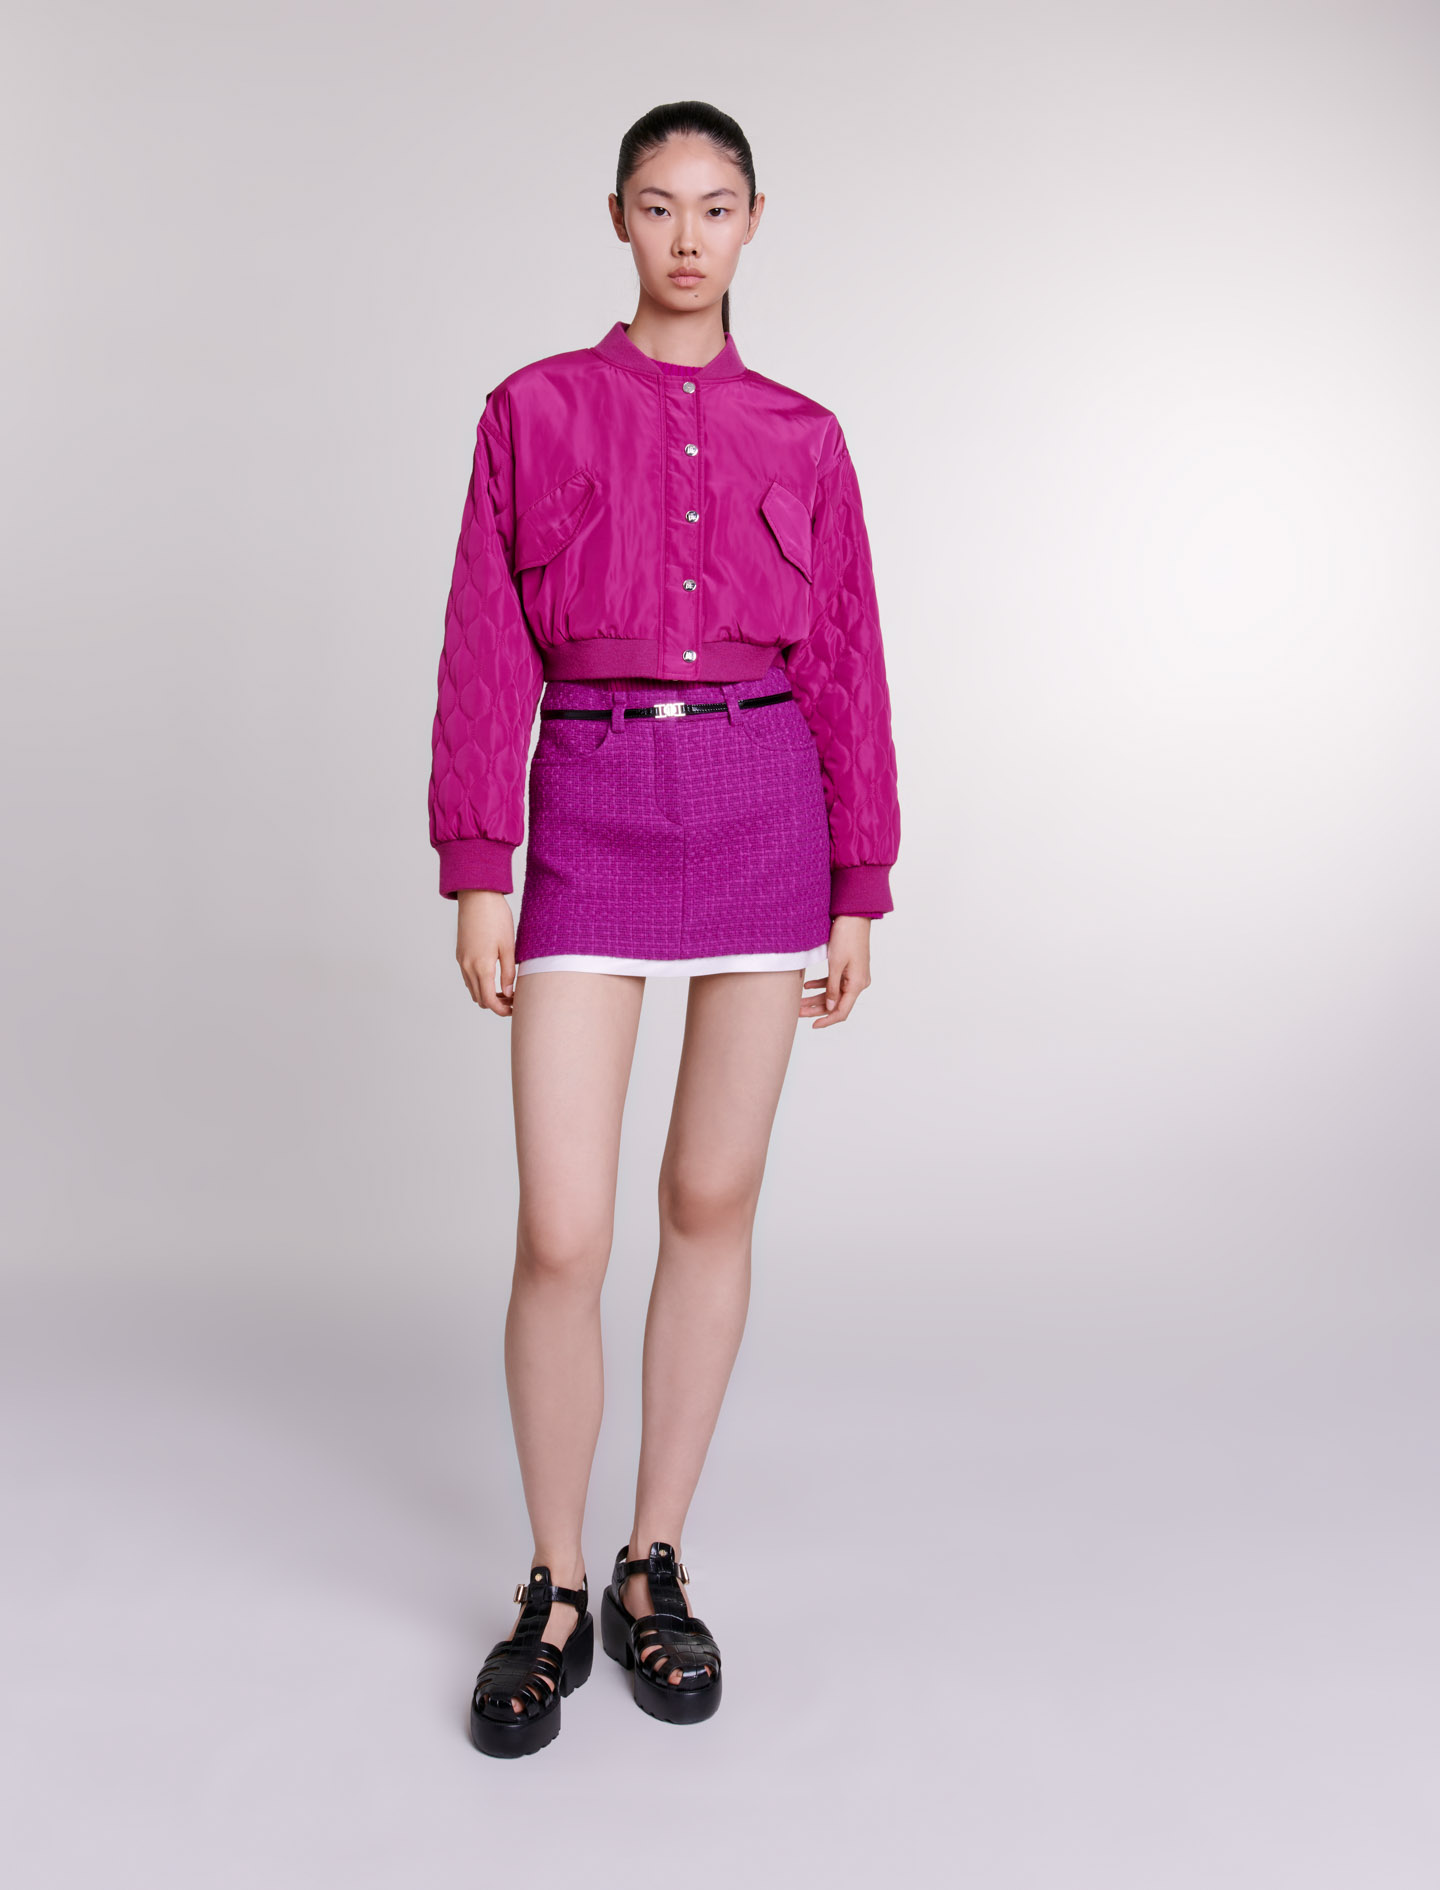 Maje Woman's polyester Lining: Short bomber jacket for Spring/Summer, in color Fuchsia Pink /